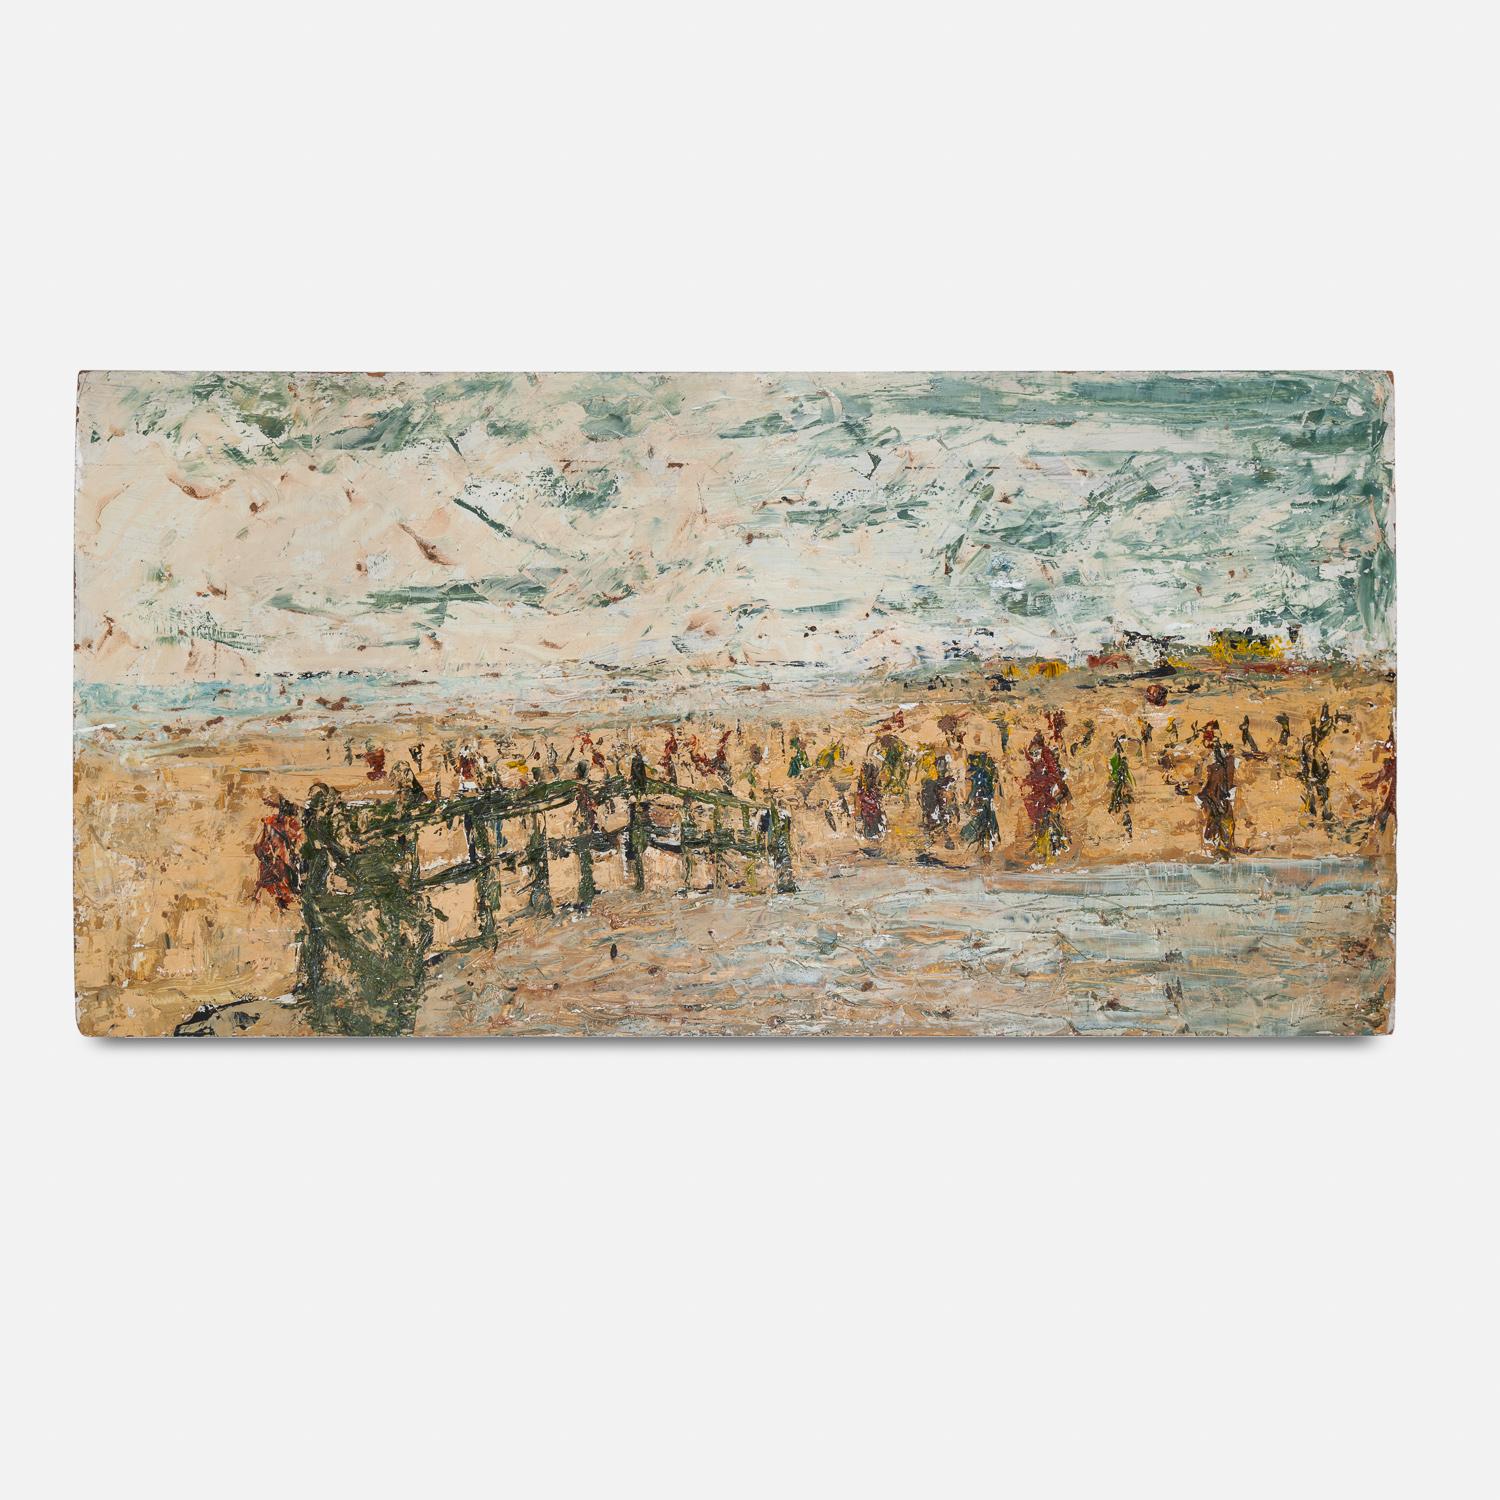 Unknown Landscape Painting - 20th Century Oil on Board Painting of a Beach